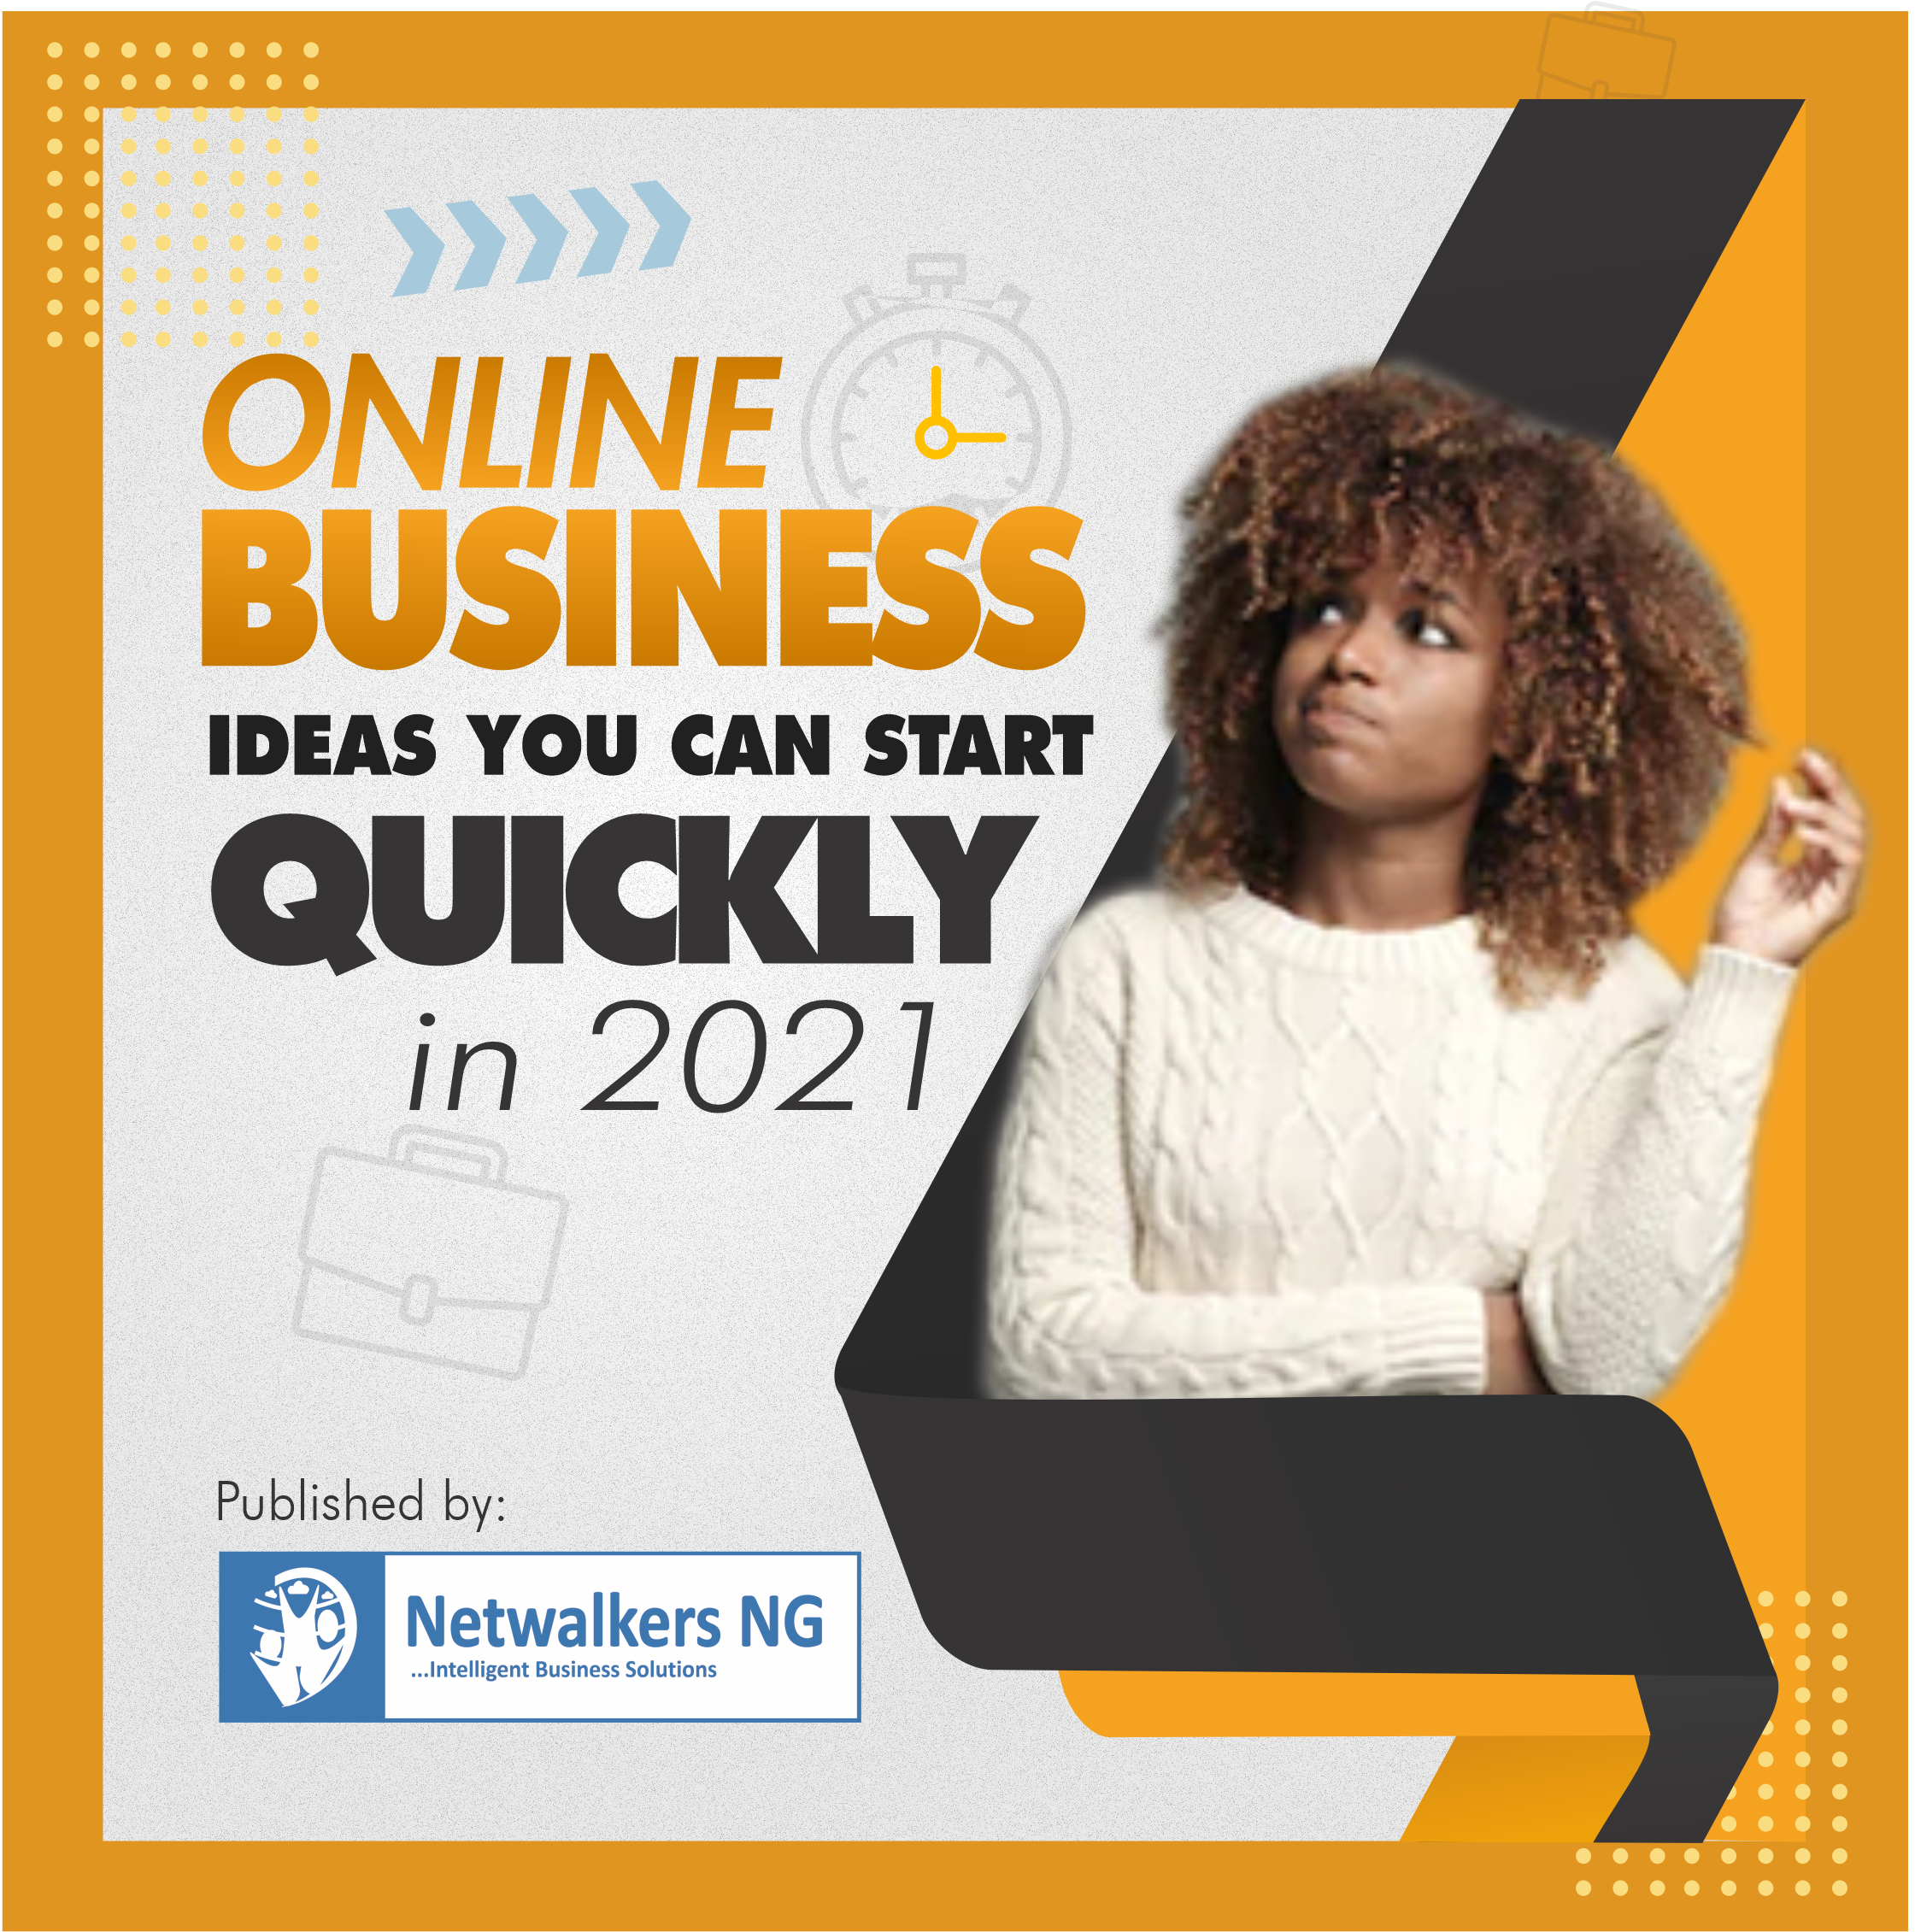 [BLOG POST] Online business ideas you can start quickly in 2021